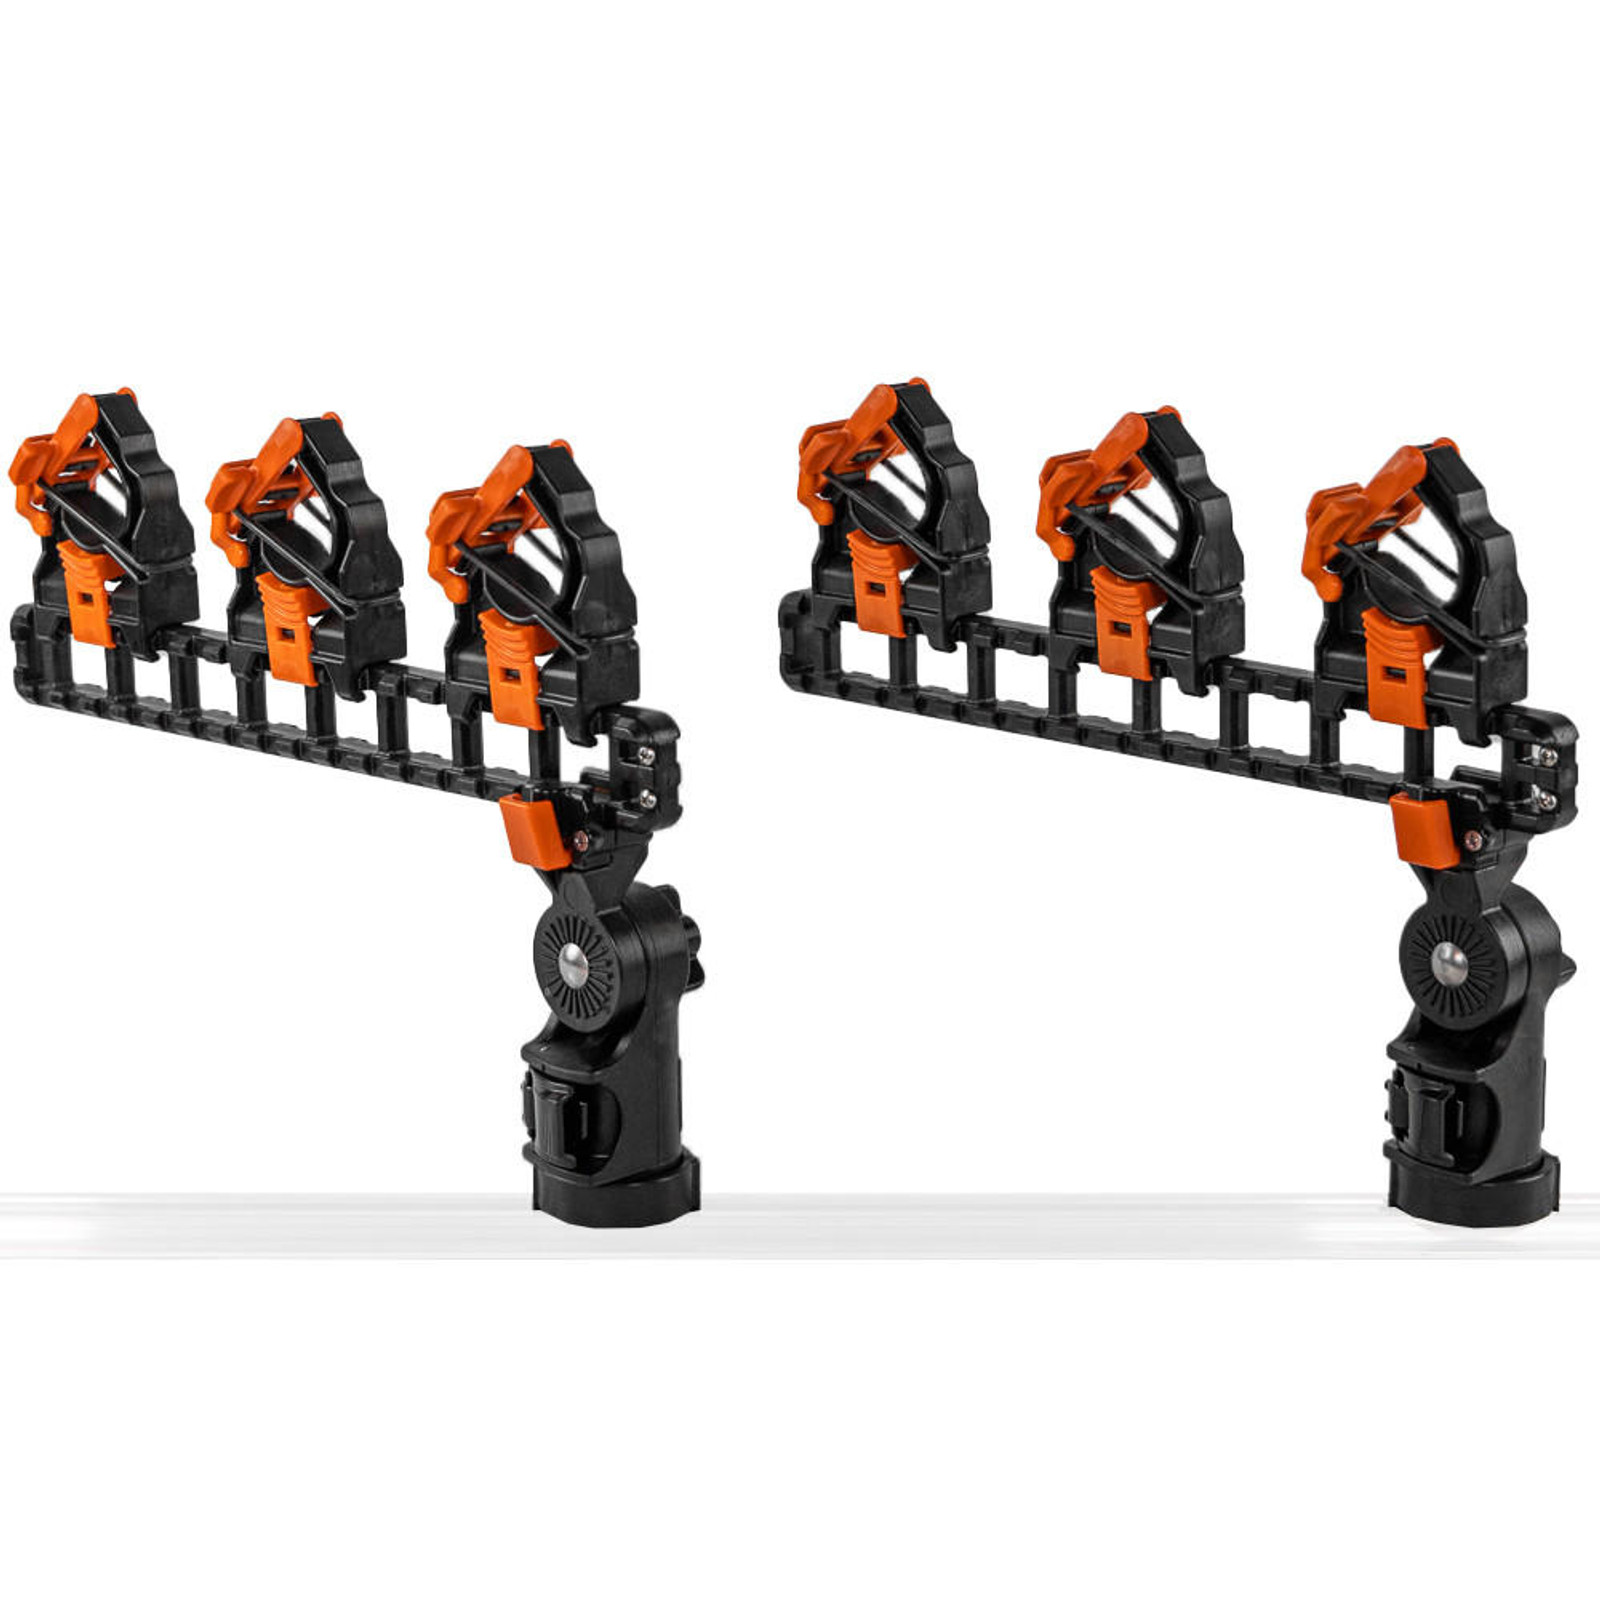  SideStage Pro Rod Rack with LockNLoad Mounting System 